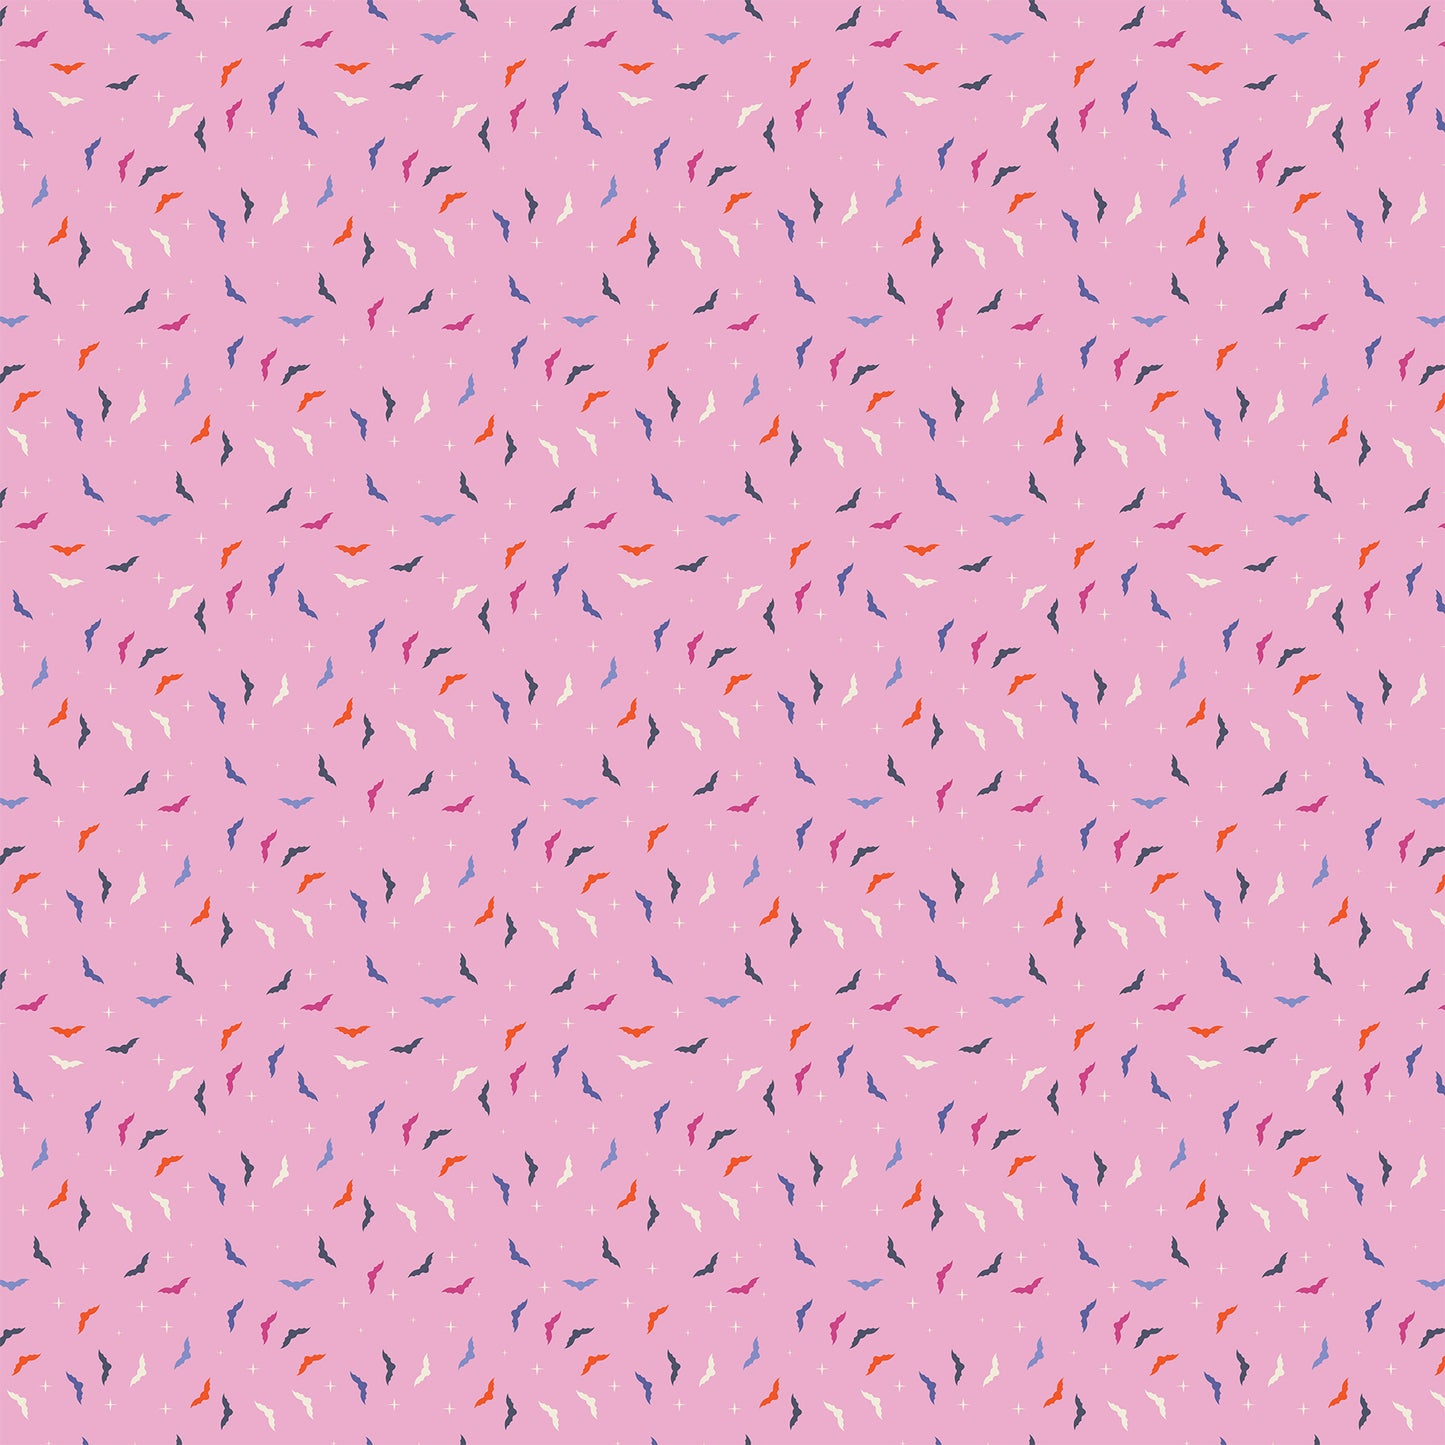 Manufacturer: Figo Fabrics Designer: Dana Willard Collection: Ghosttown Print Name: Ditsy Bats in Pink Material: 100% Cotton Weight: Quilting  SKU: 90518-21 Width: 44 inches